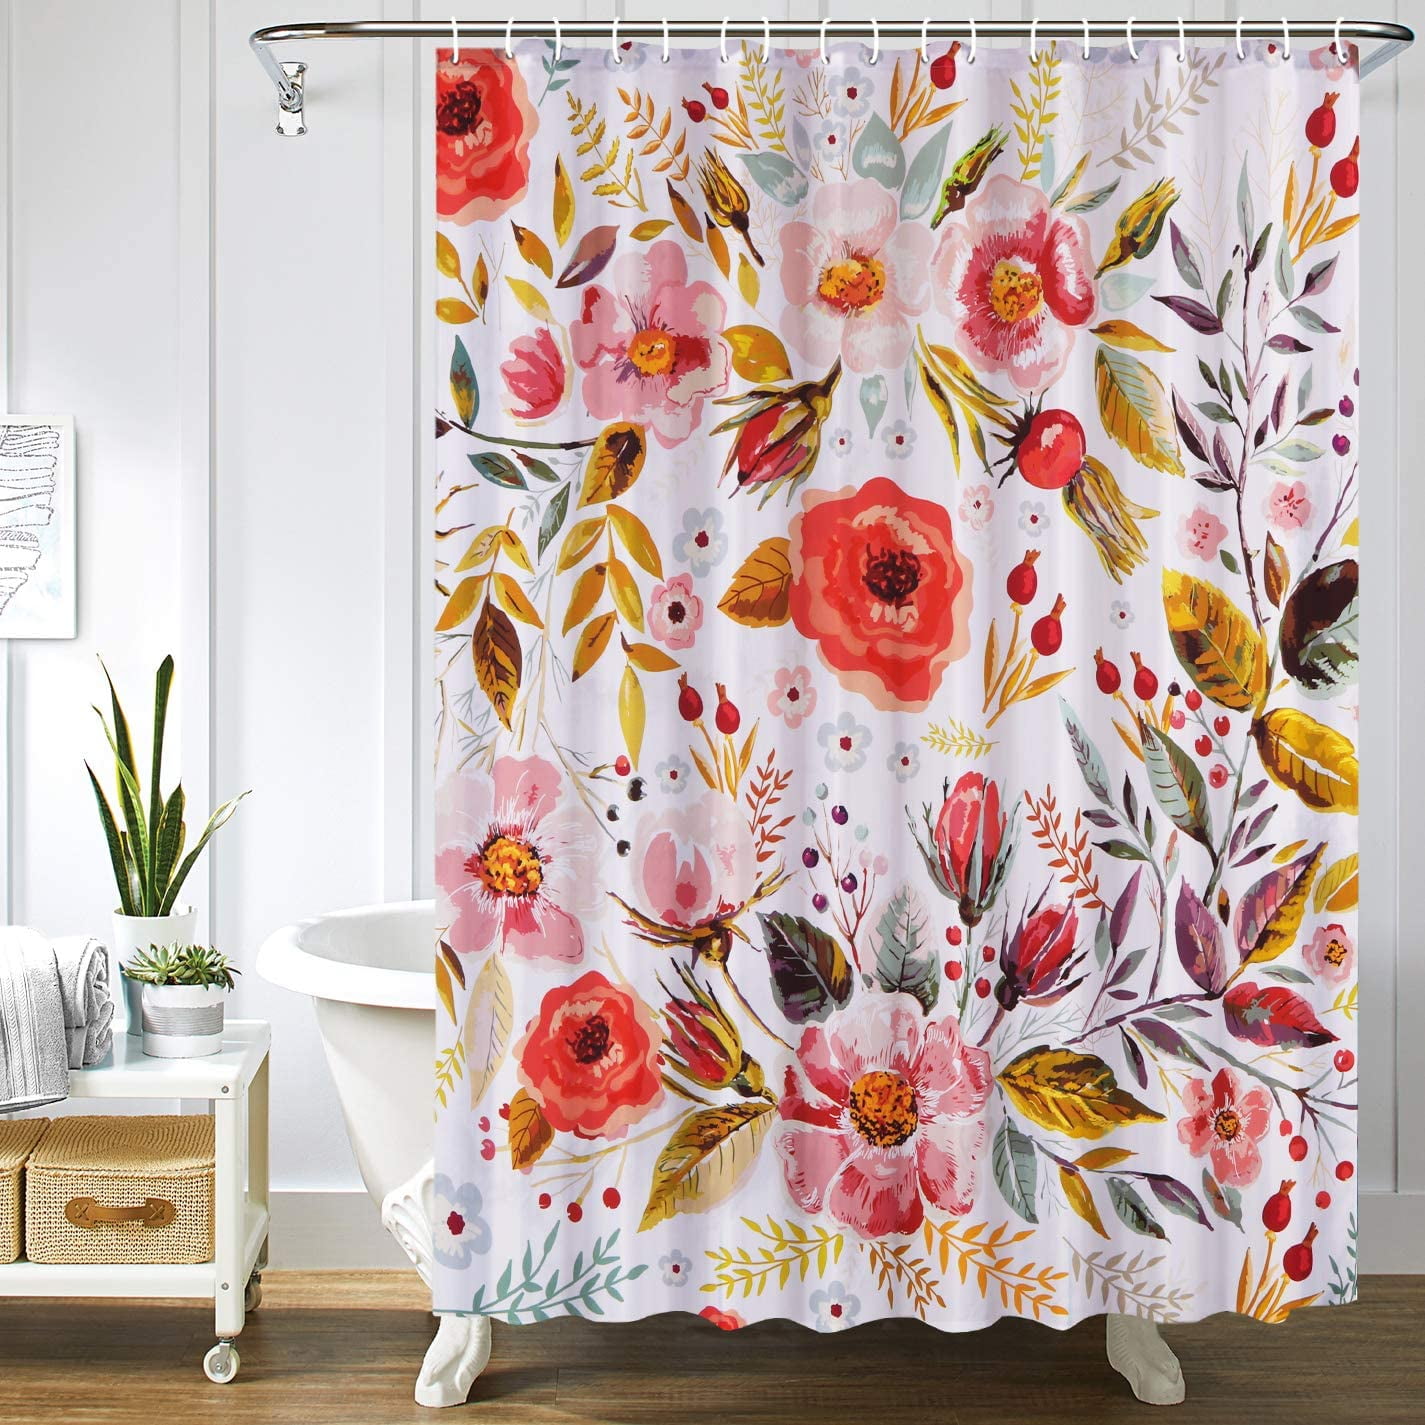 Uphome Floral Fabric Shower Curtain Rose Black and Purple 72"W x 78"H 